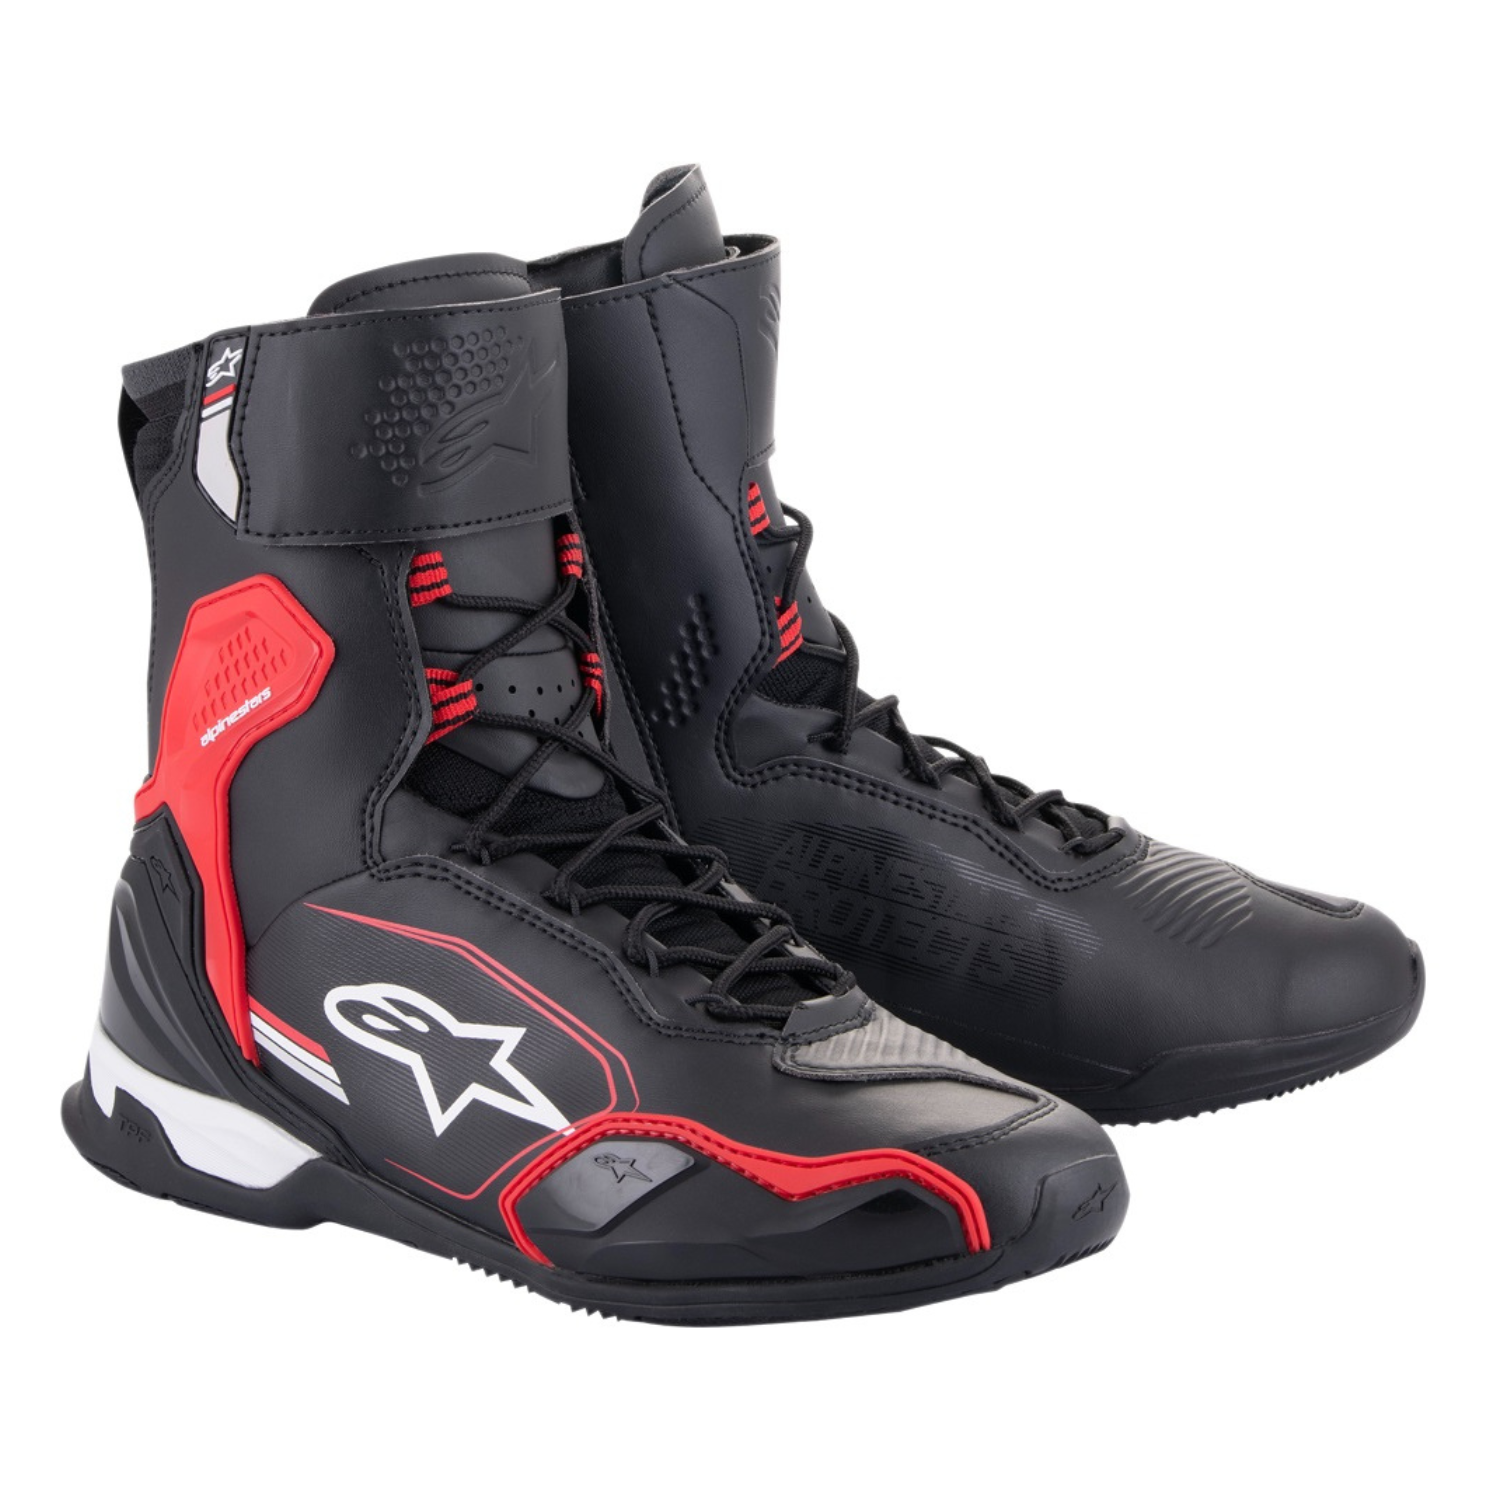 Image of Alpinestars Superfaster Shoes Black Bright Red White Taille US 8